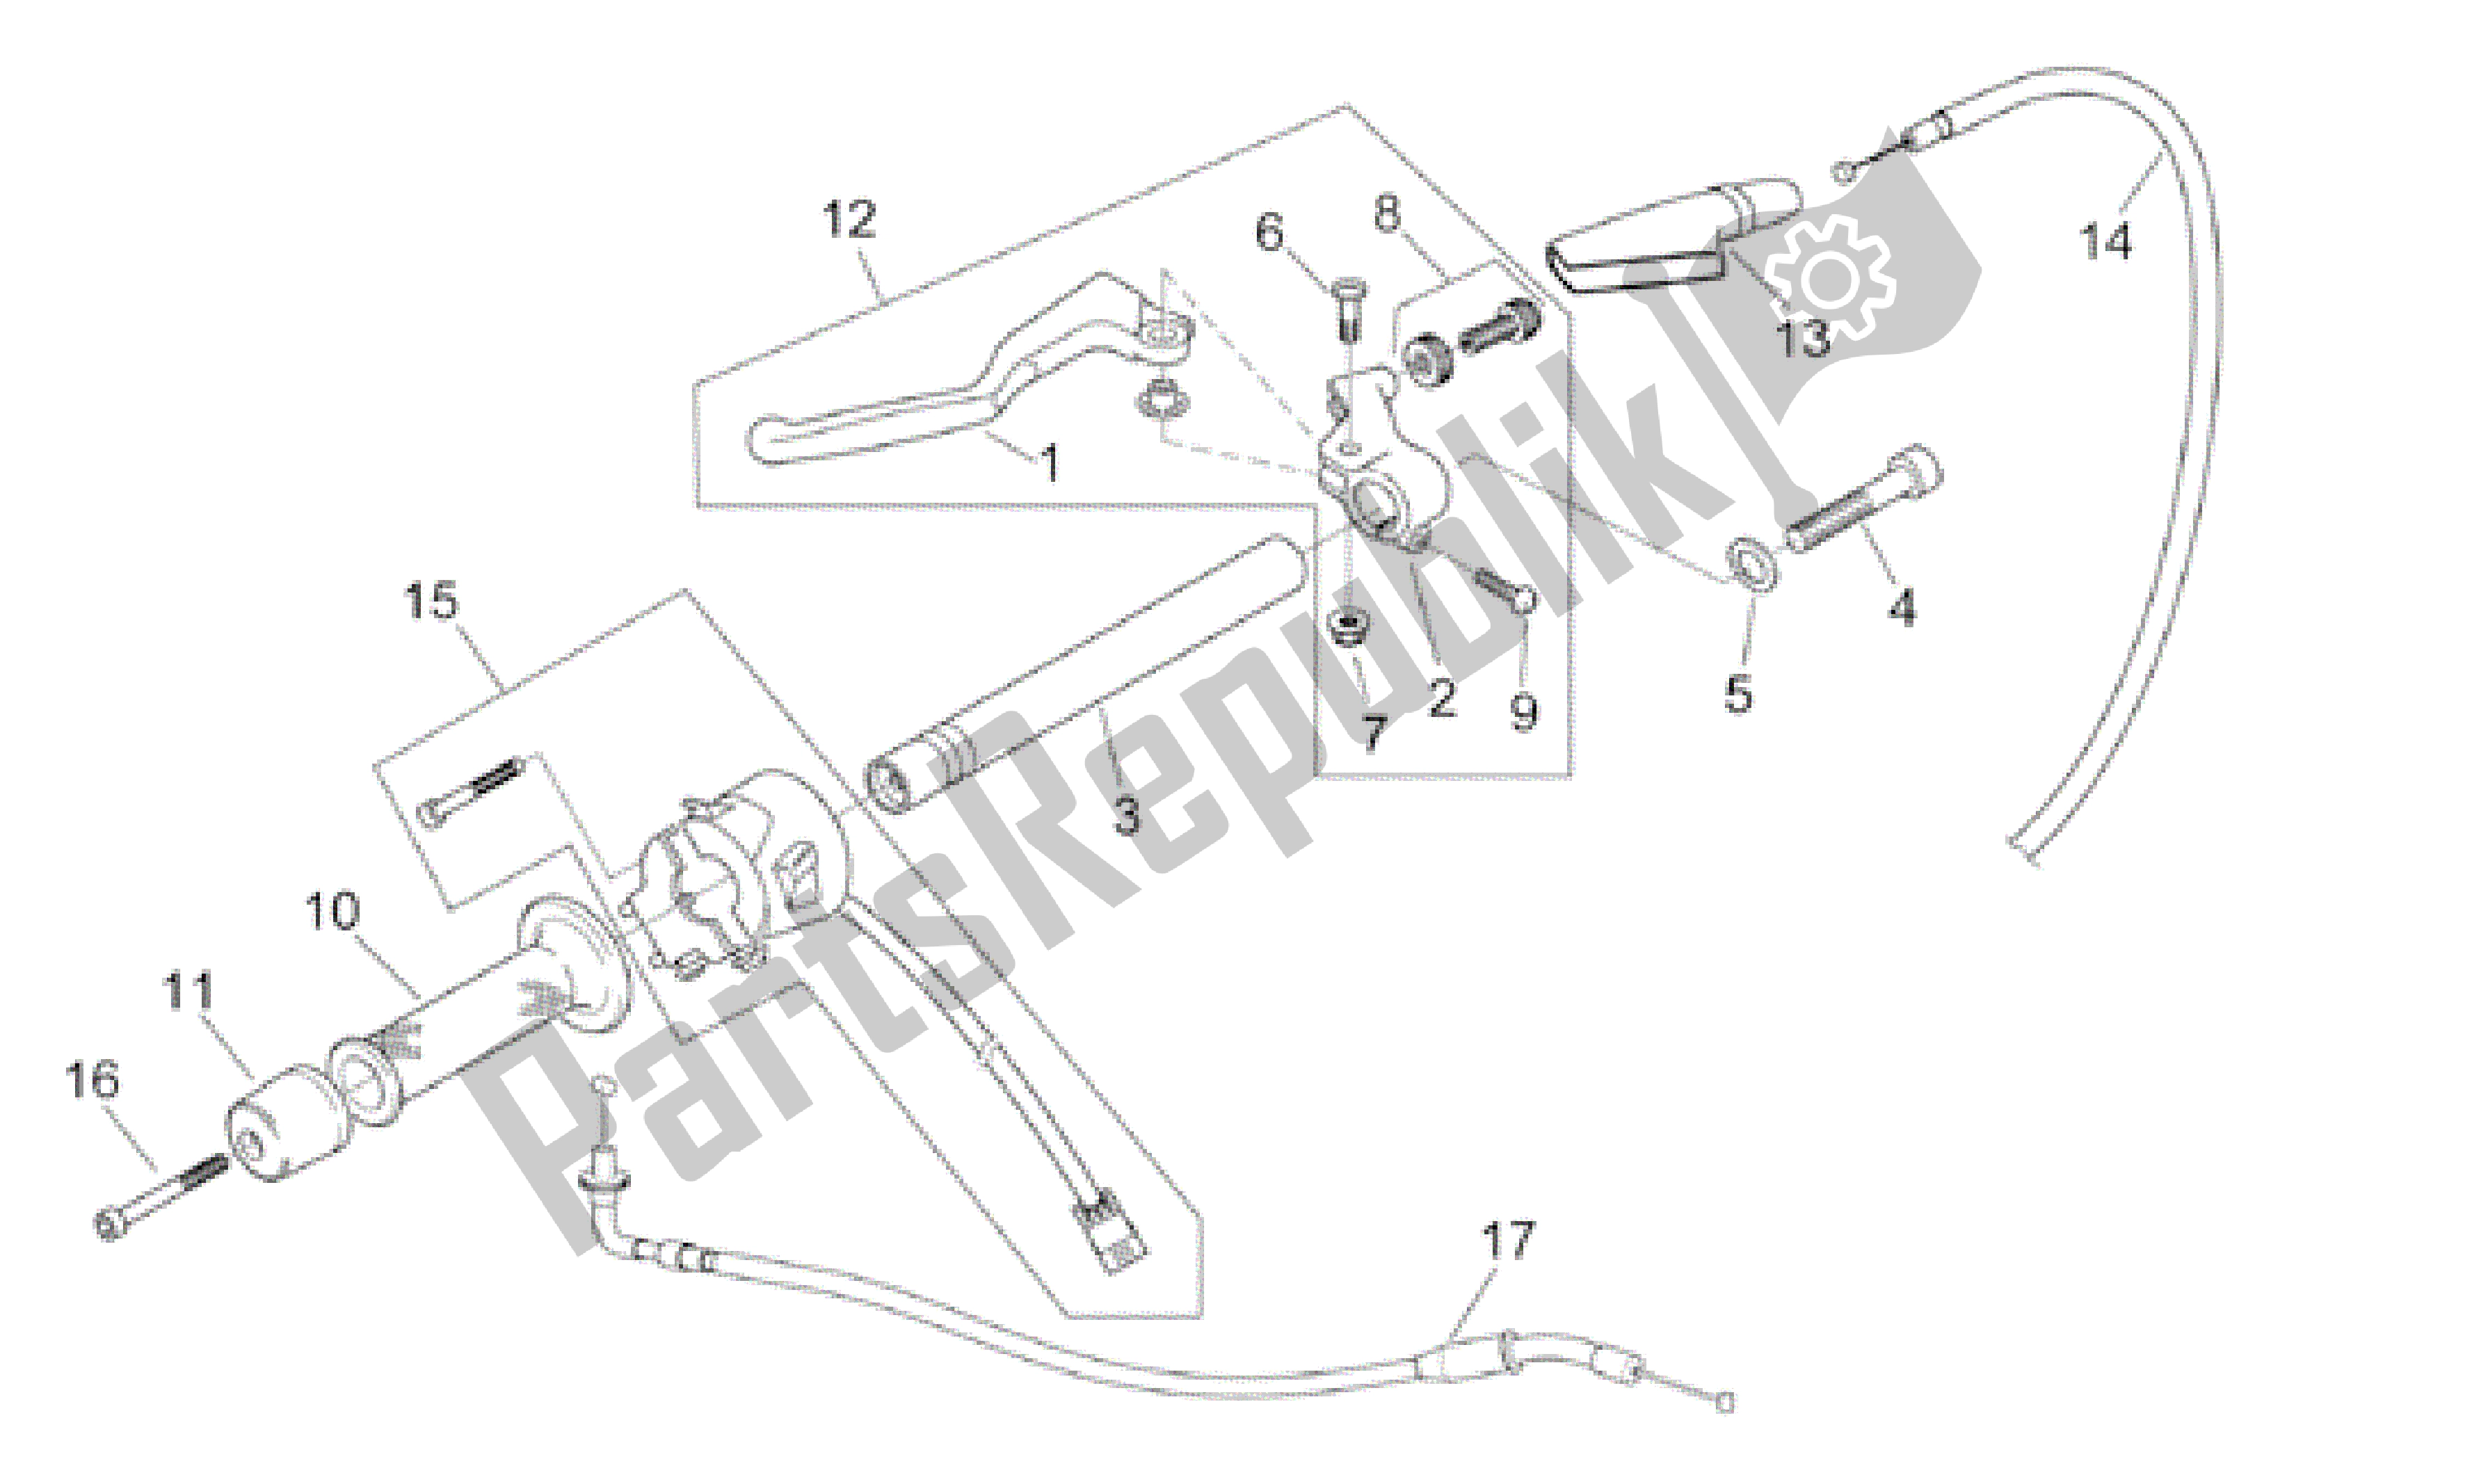 All parts for the Lh Controls of the Aprilia RS 50 1999 - 2005